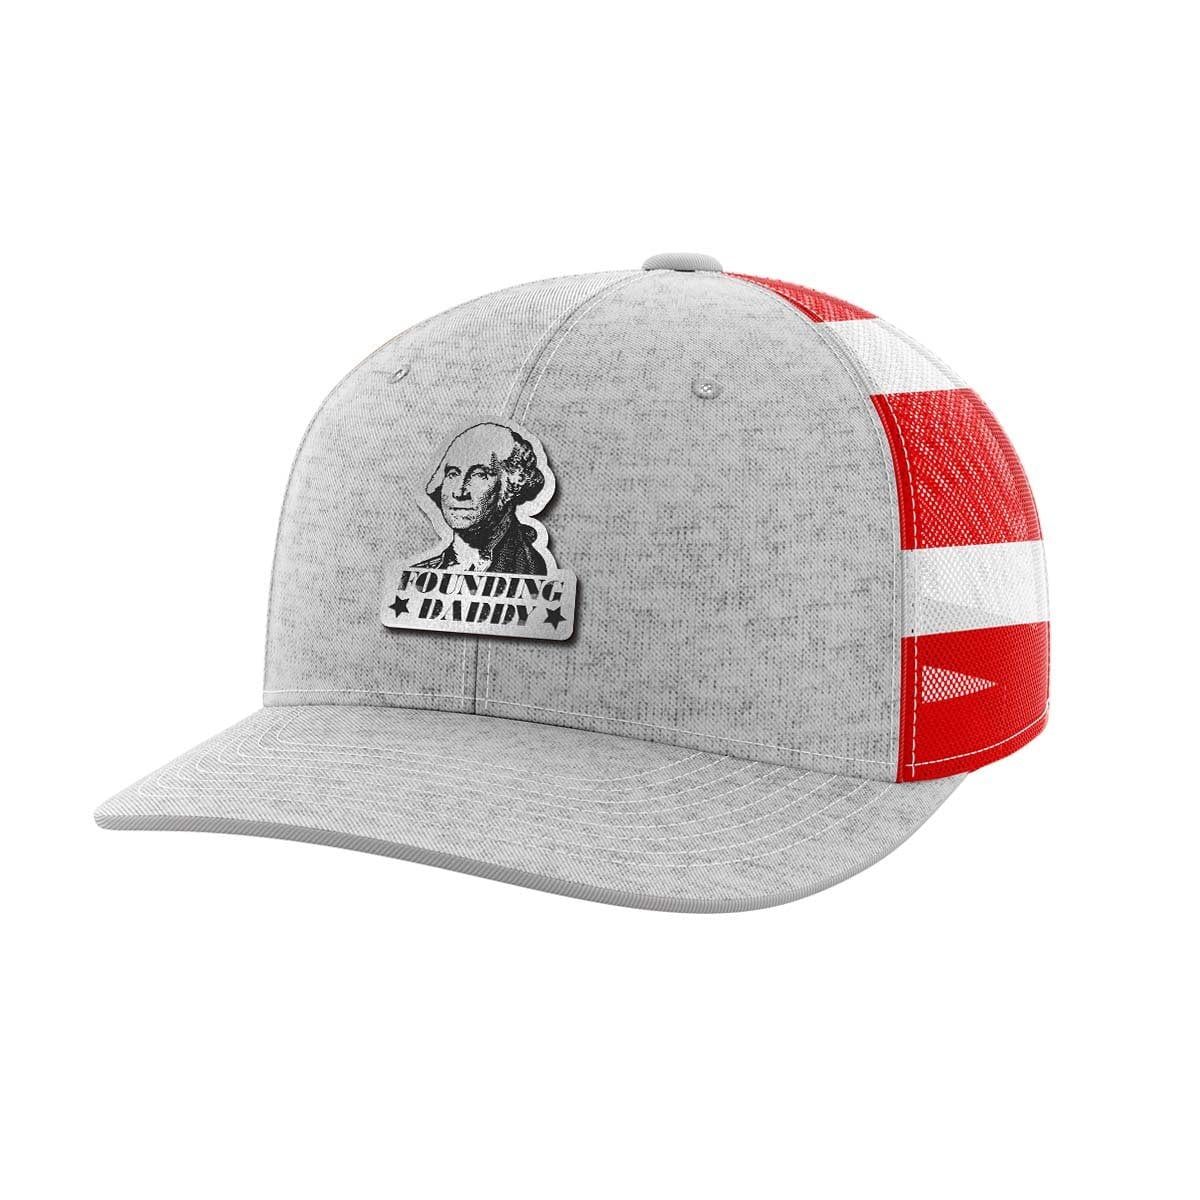 Founding Daddy Black Patch Hat - Greater Half